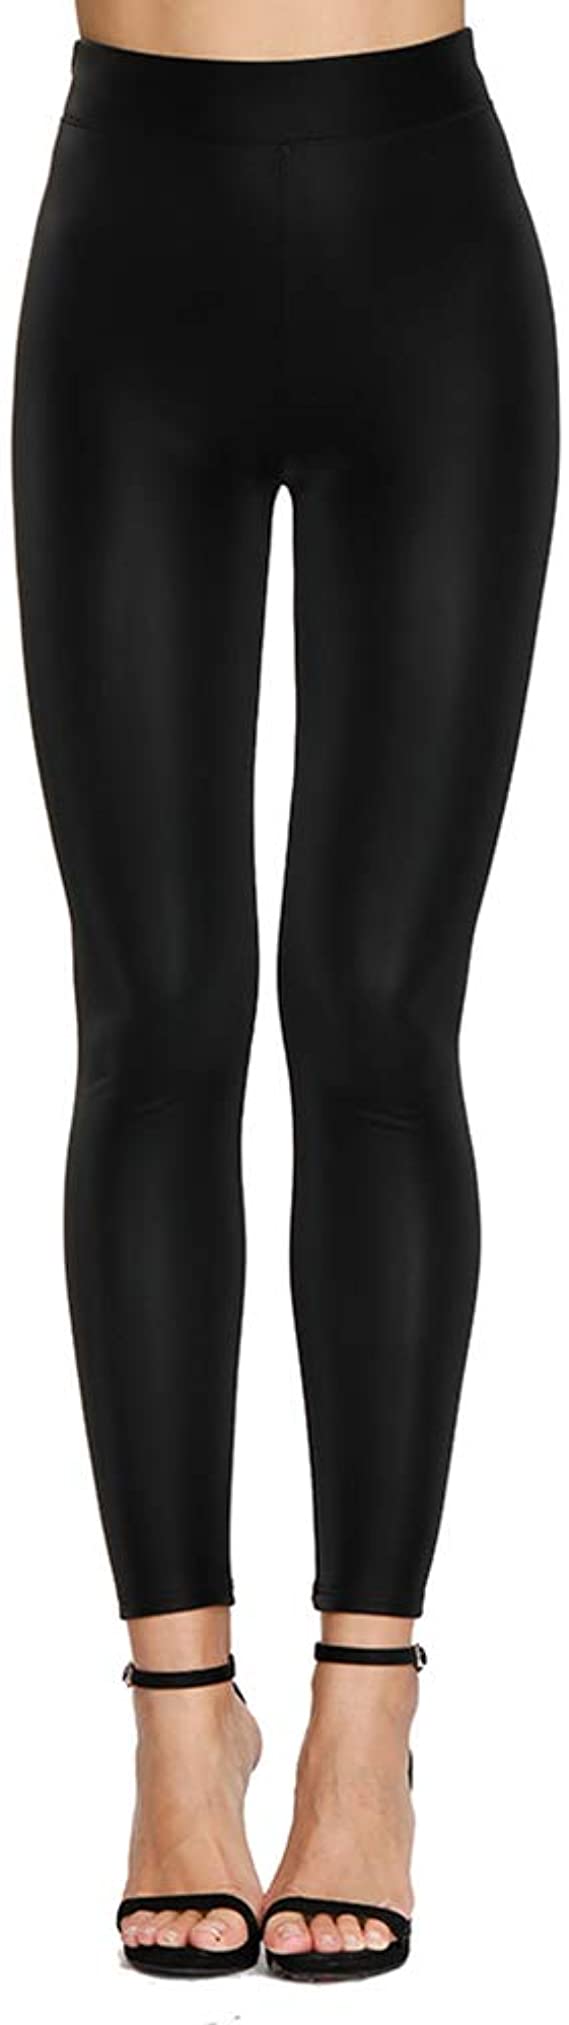 MCEDAR Faux Leather Legging for women Black leather pants High Waist Sexy Skinny Outfit for Causal, Club, Night Out